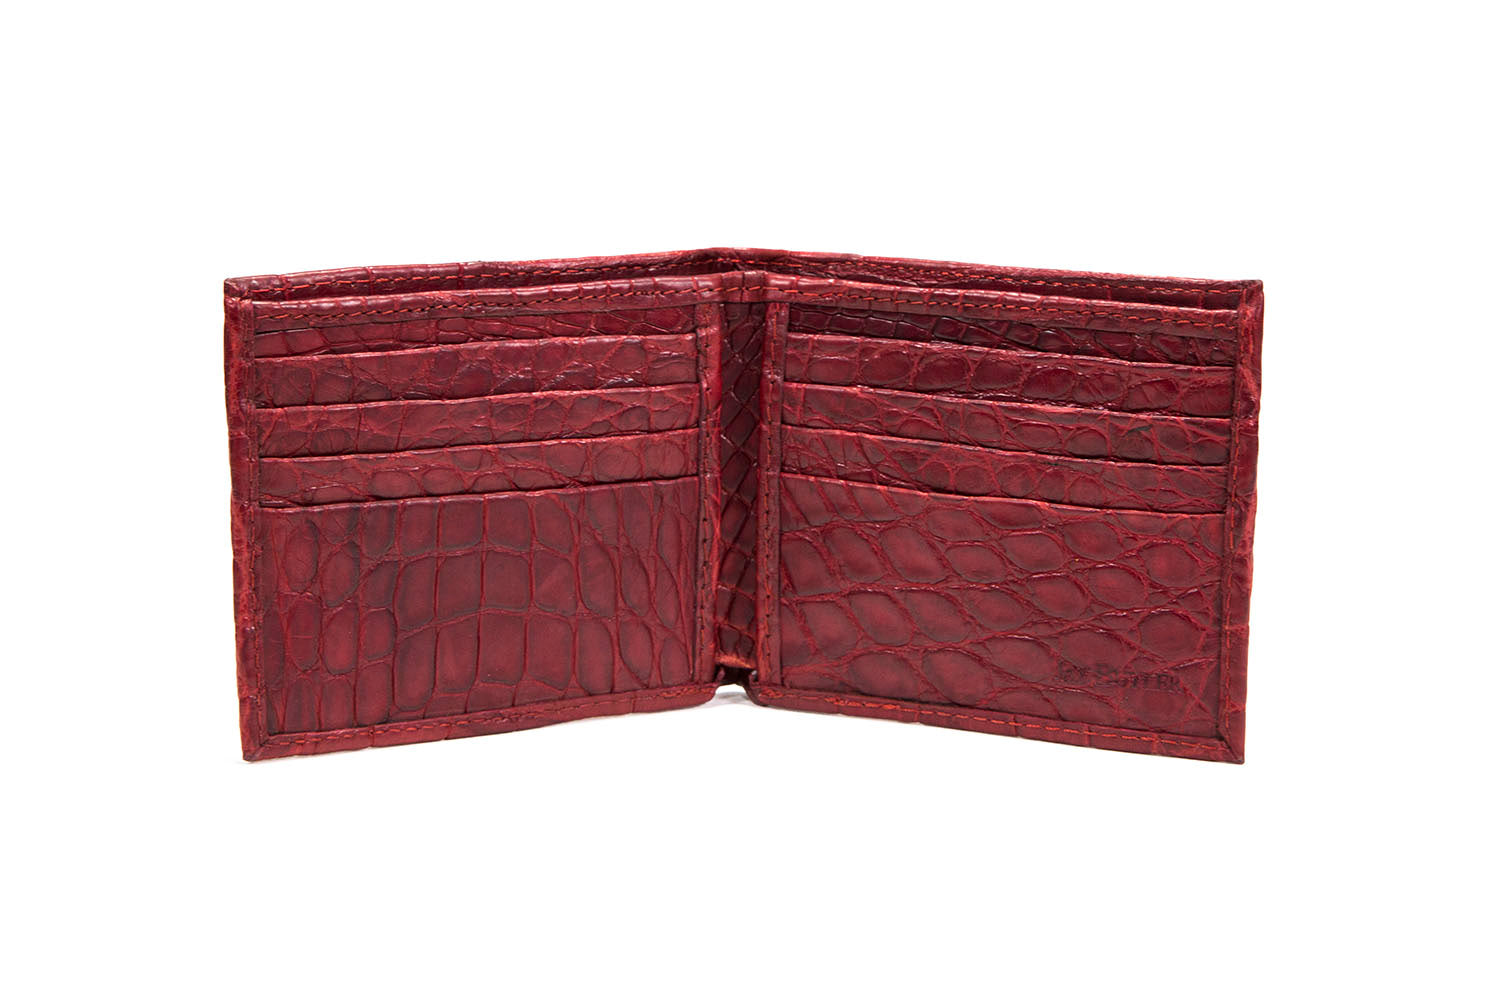 Genuine Ostrich Skin Leather Men's Bifold Wallets Made In USA